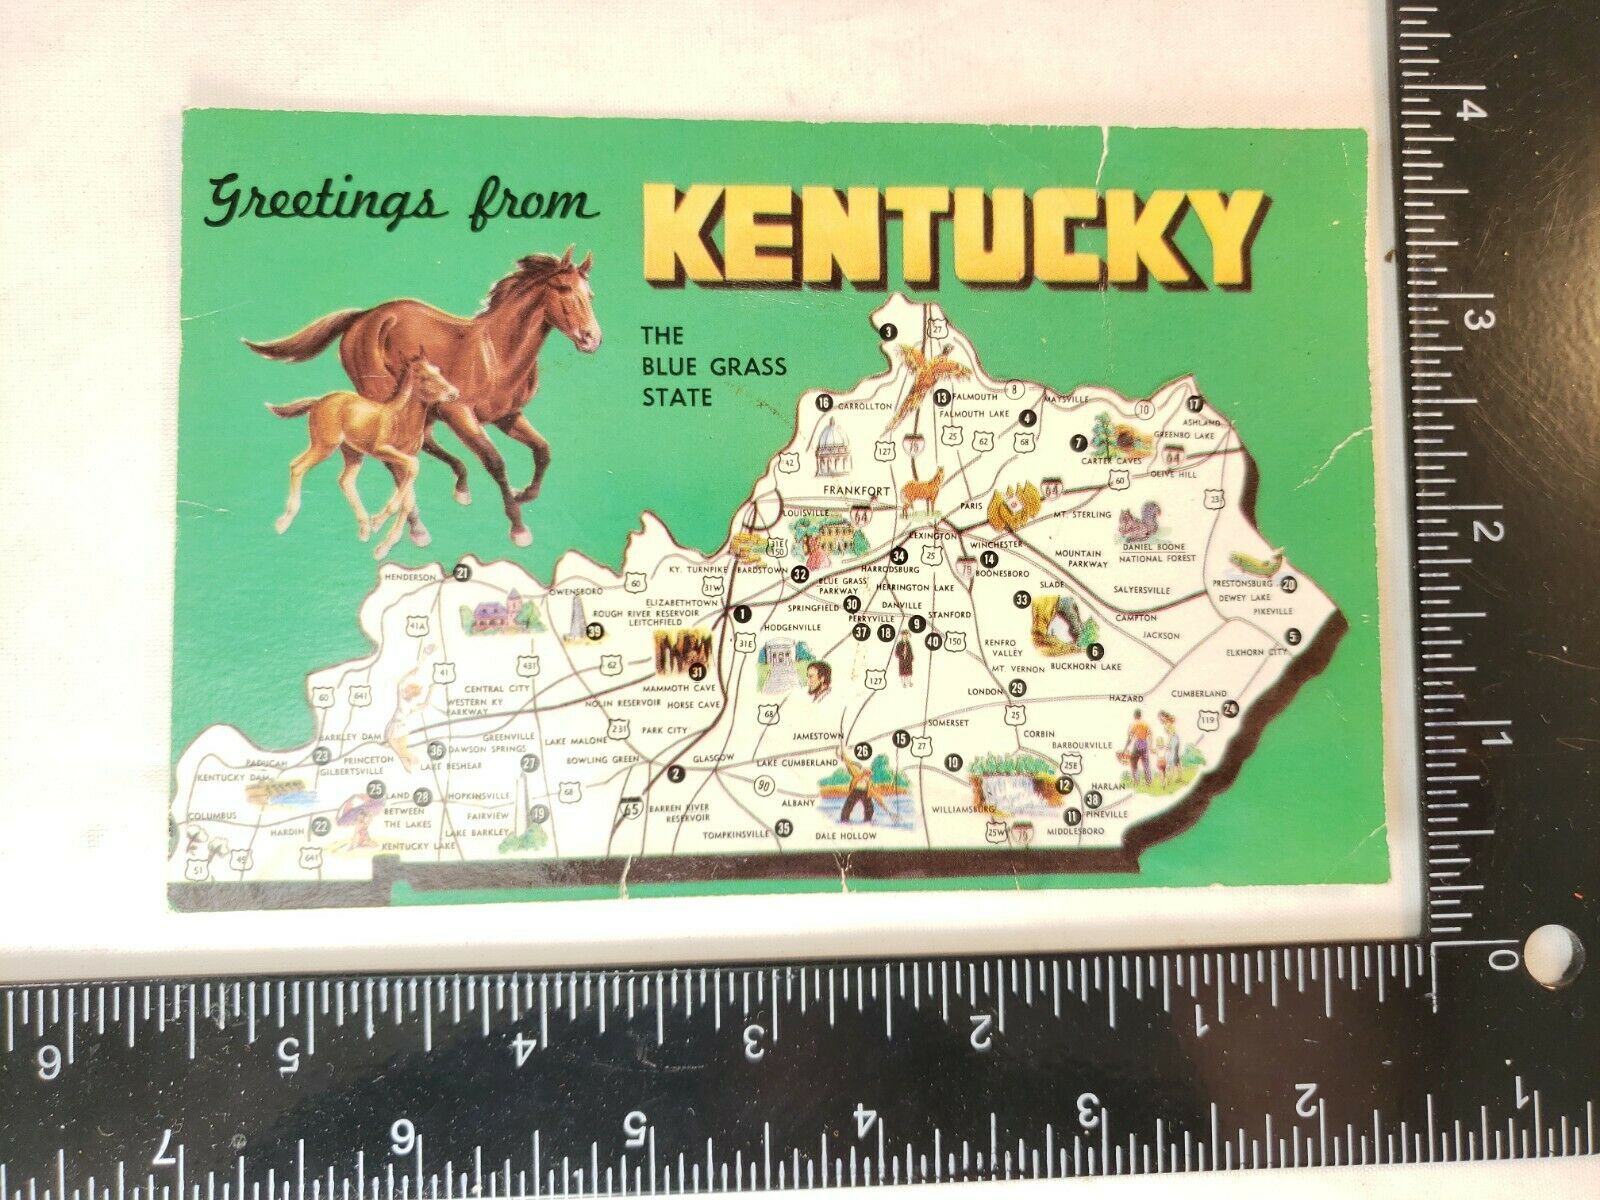 Greetings from Kentucky Large Map Scenic Vintage Linen Postcard -FREE SHIPPING